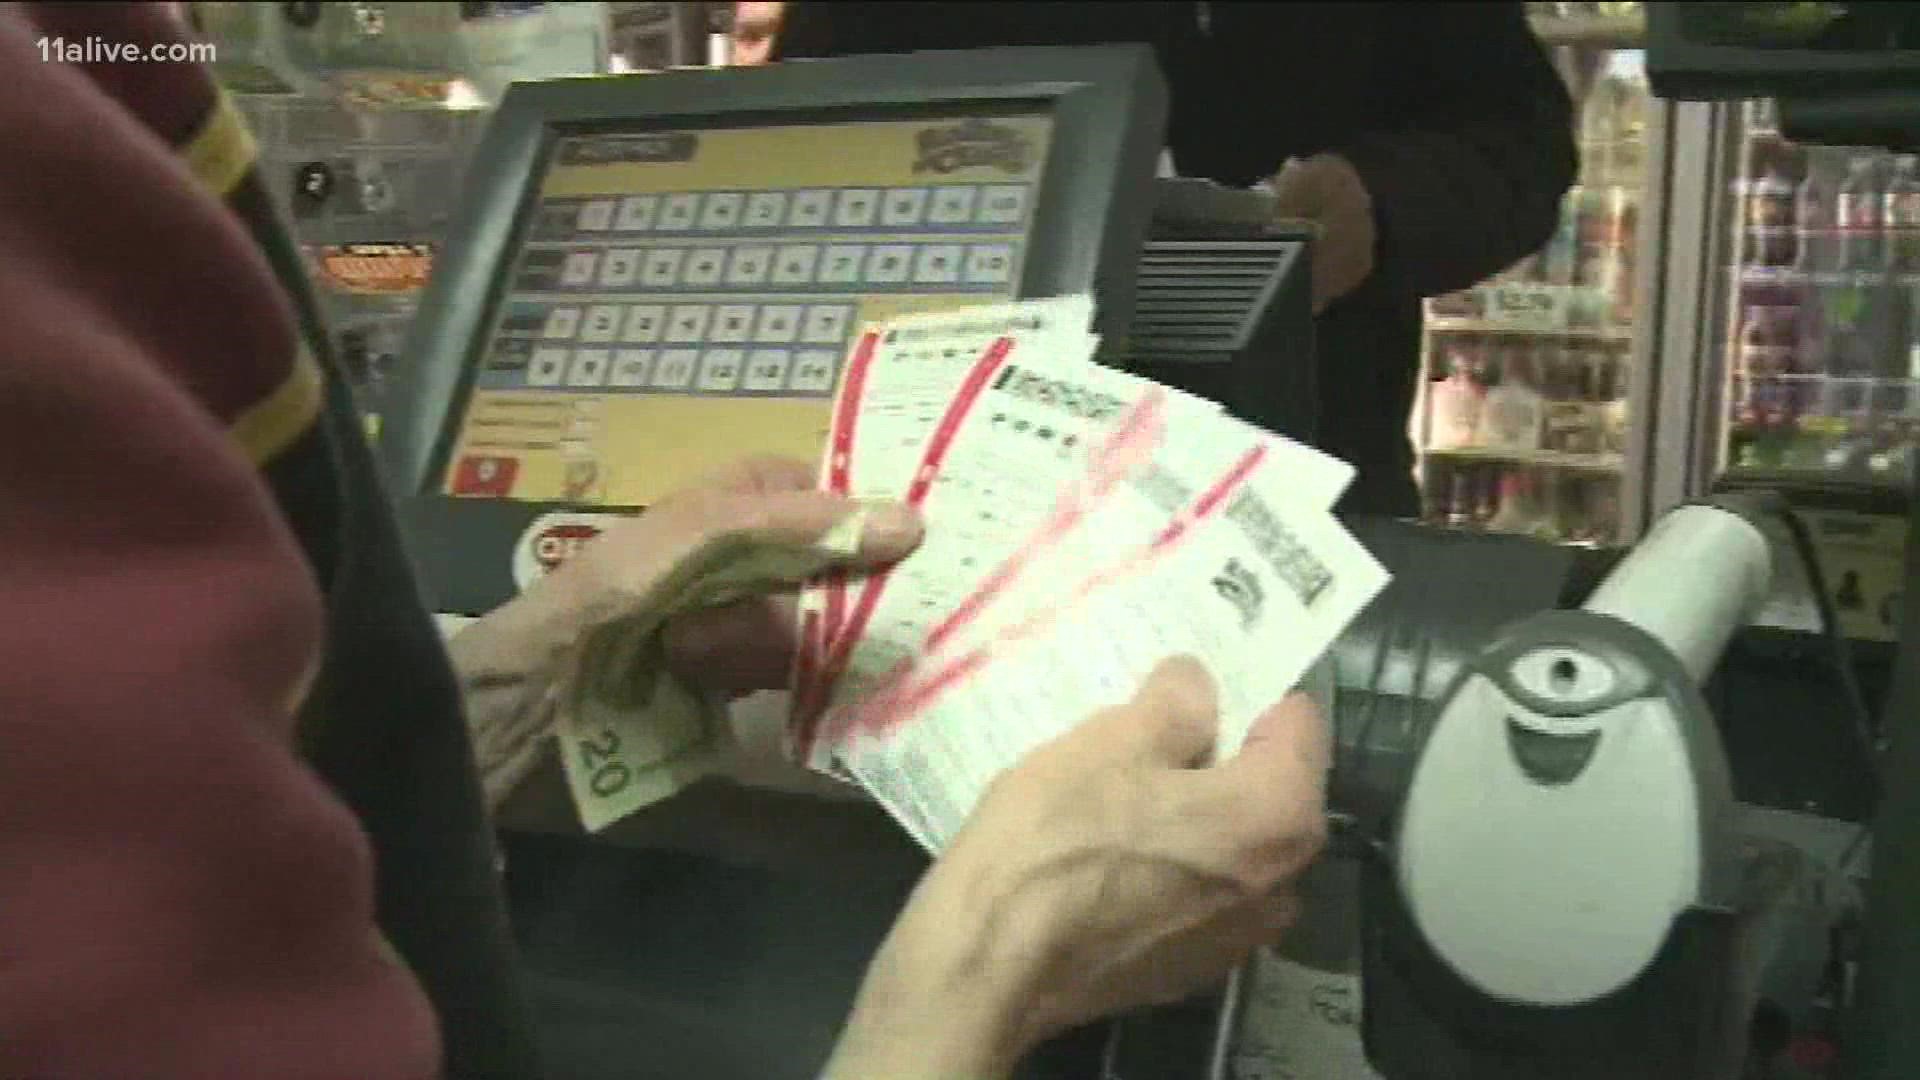 The estimated jackpot for the next Powerball drawing increased just hours after it was first announced.